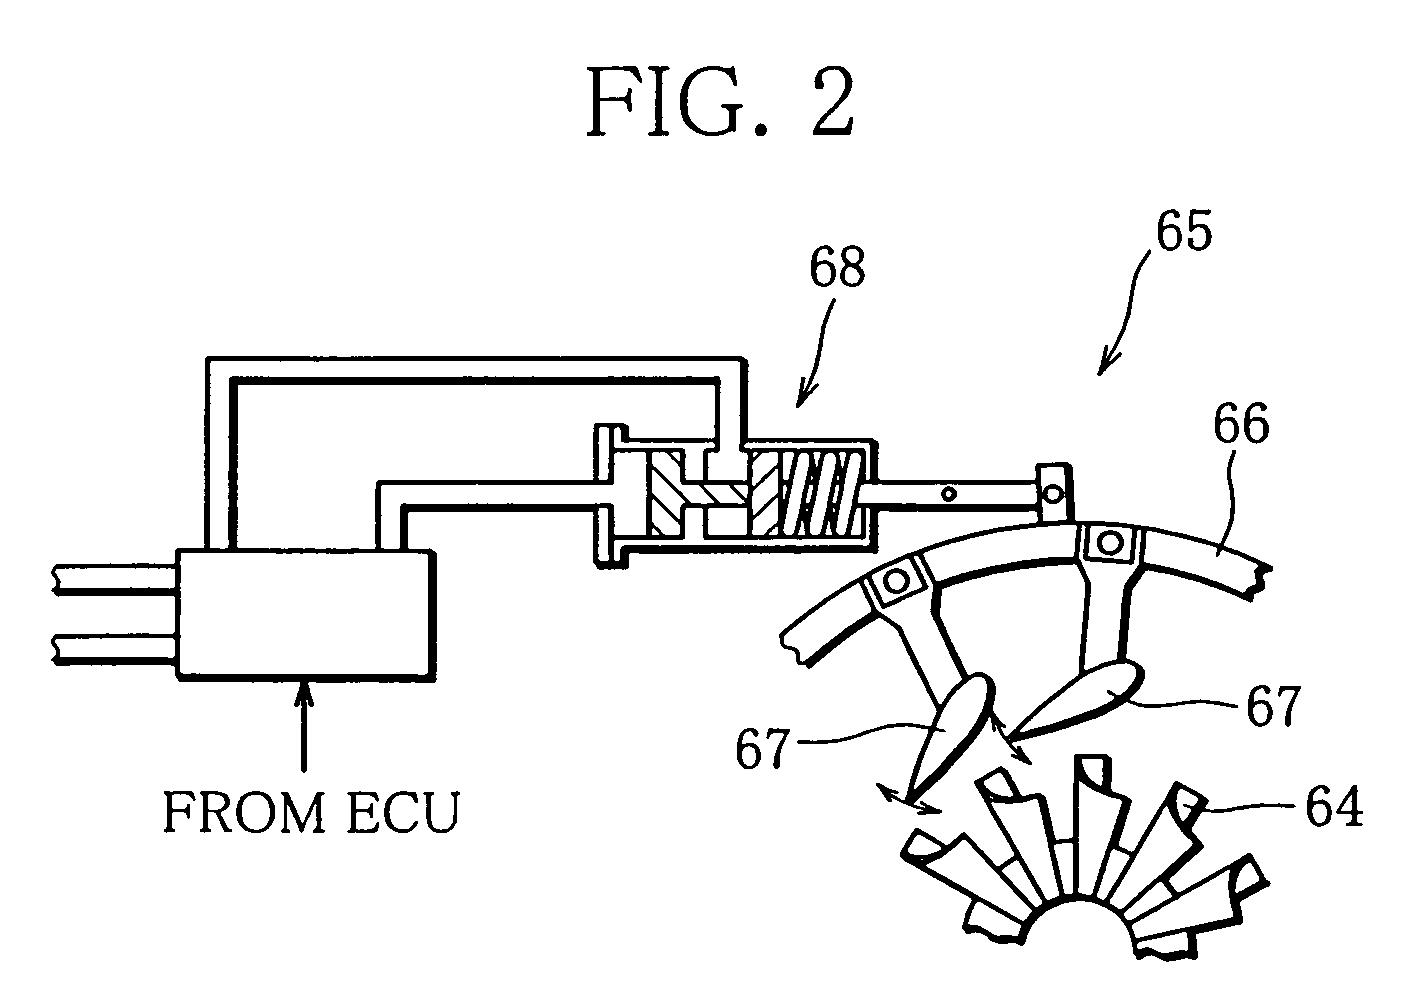 Failure detection apparatus for an internal combustion engine